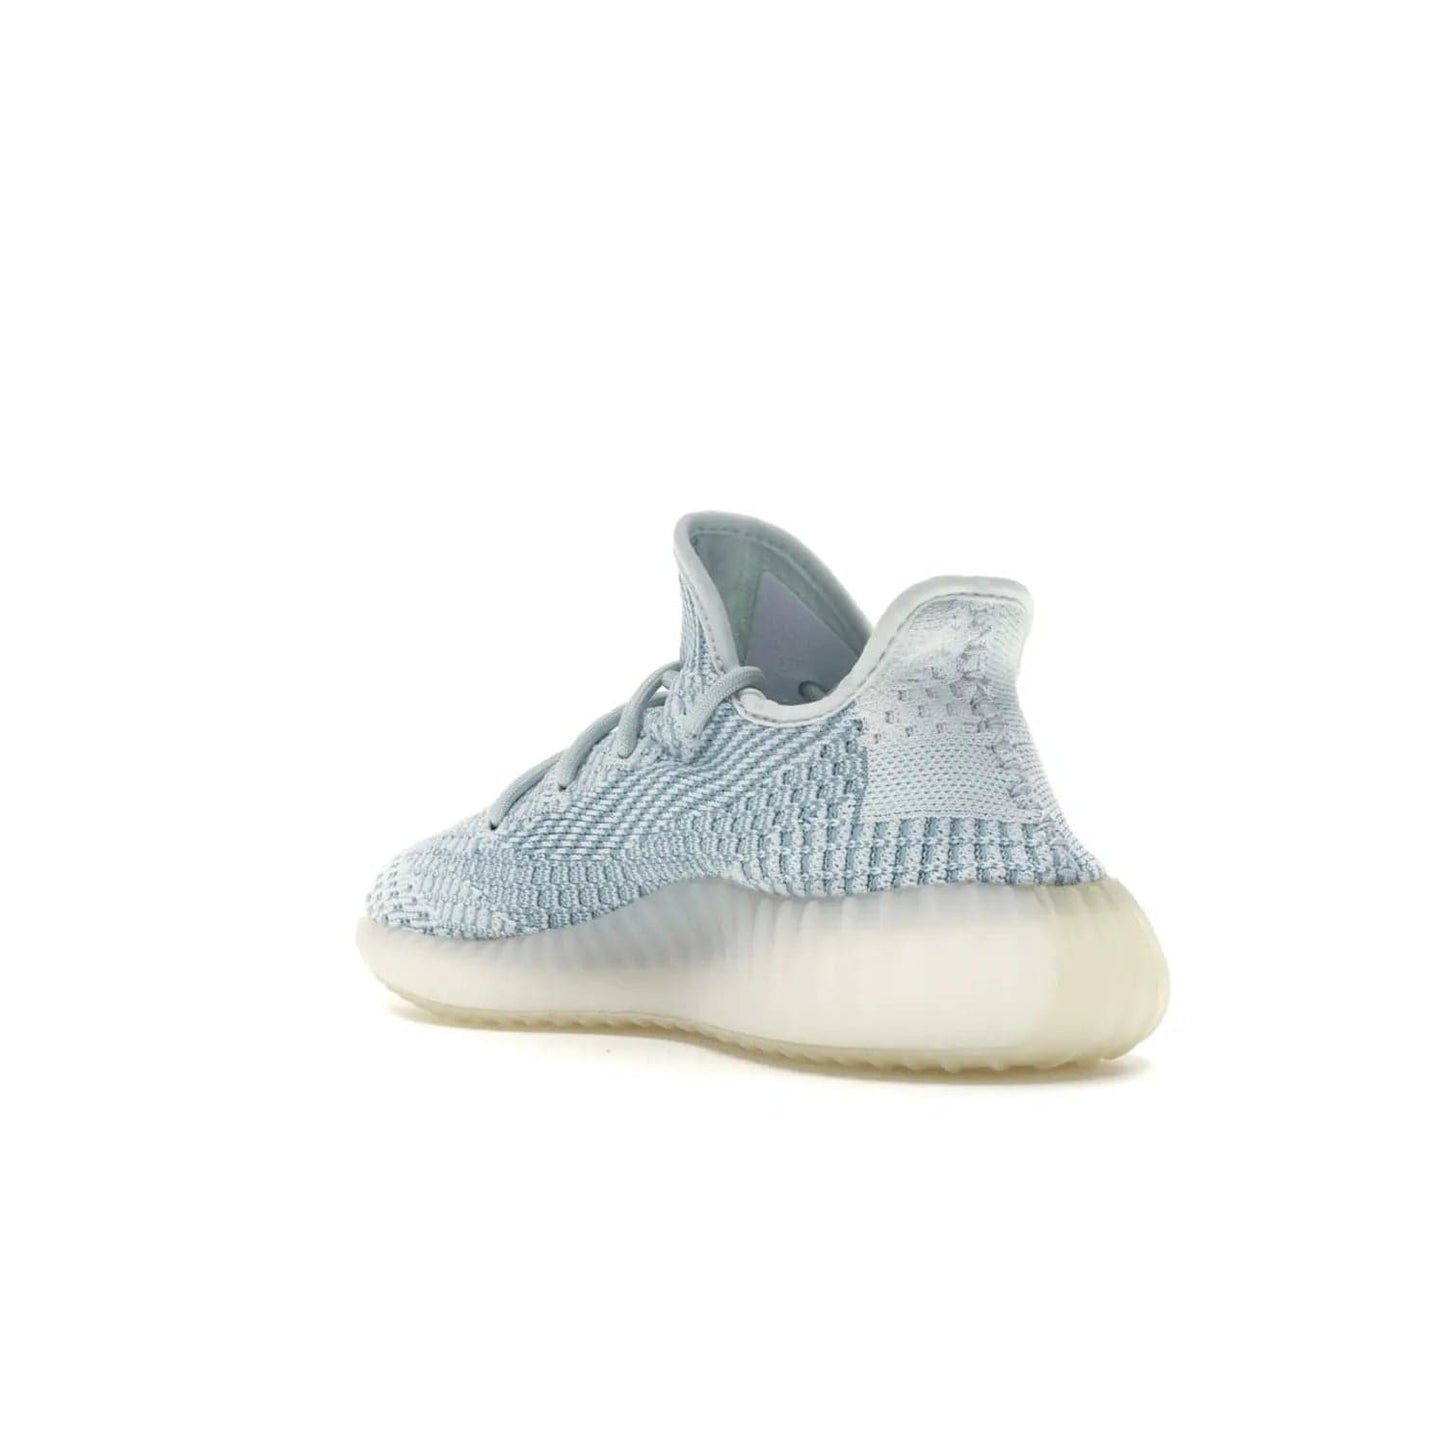 adidas Yeezy Boost 350 V2 Cloud White (Non-Reflective) - Image 24 - Only at www.BallersClubKickz.com - Adidas Yeezy Boost 350 V2 Cloud White (Non-Reflective) features Primeknit fabric and a unique, eye-catching design of cream, bluish-white, and transparent strip. Step out in timeless style with this eye-catching sneaker.